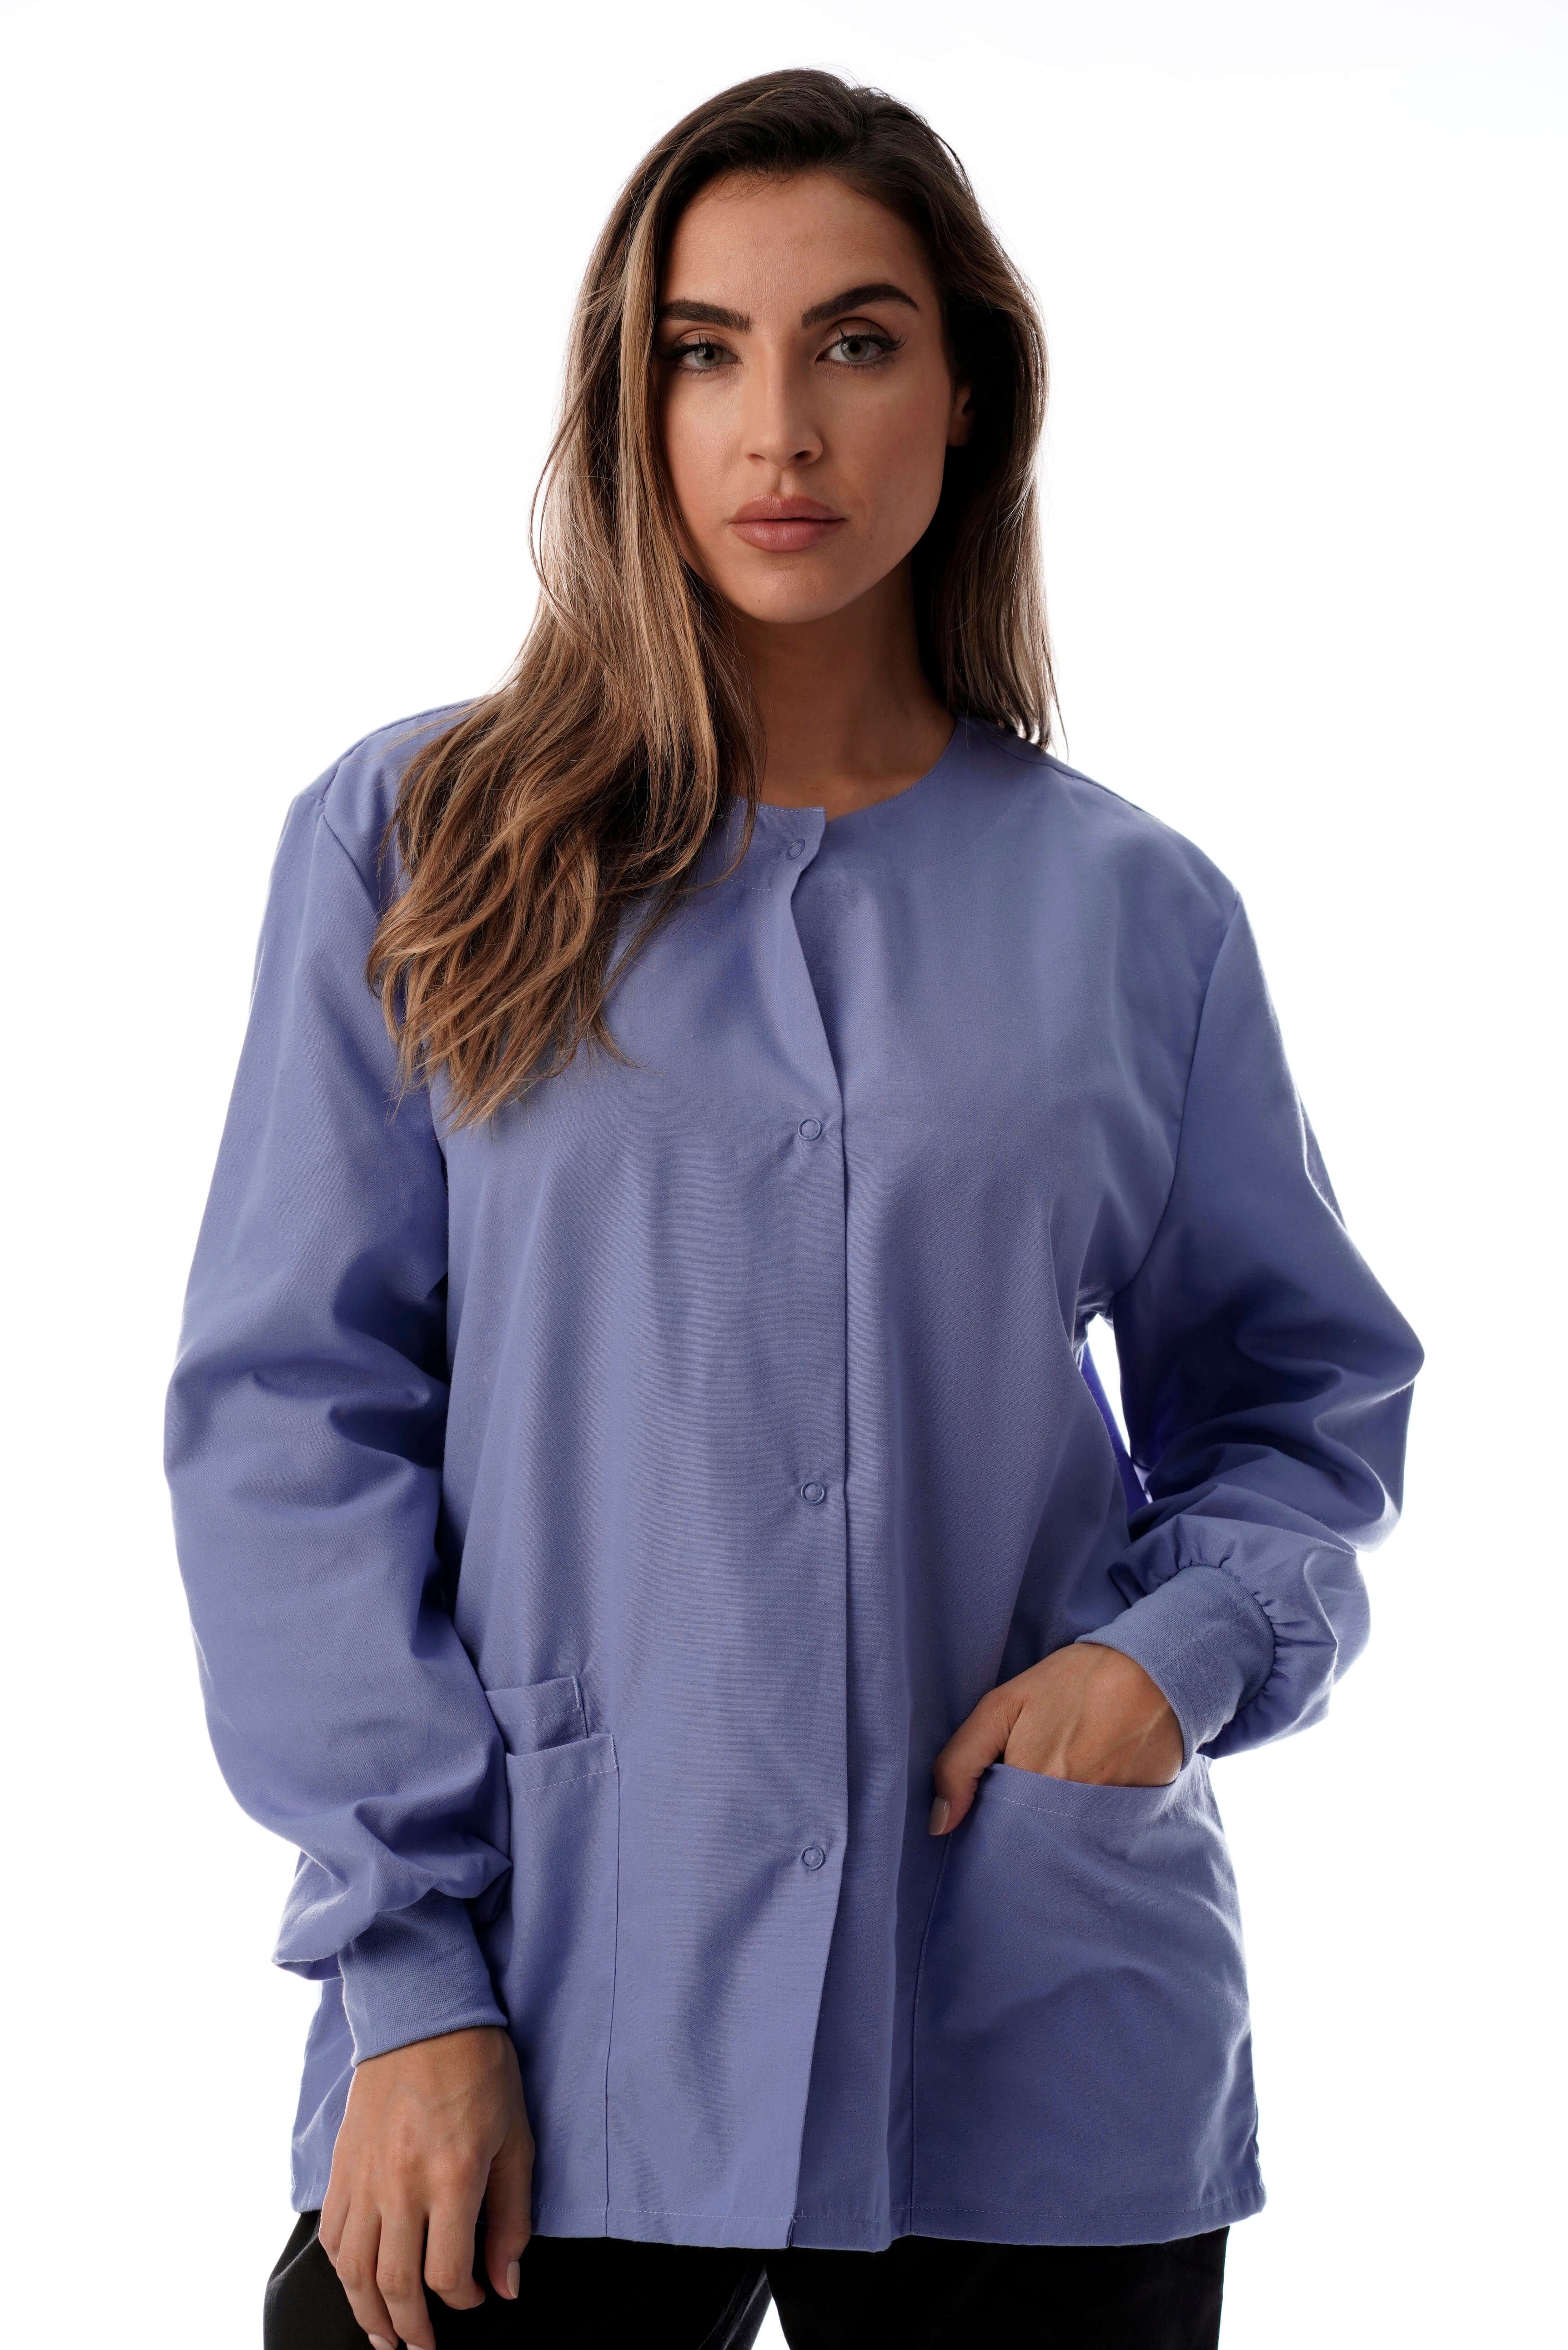 Just Love Women's Solid Scrub Jacket - Comfortable and Professional ...